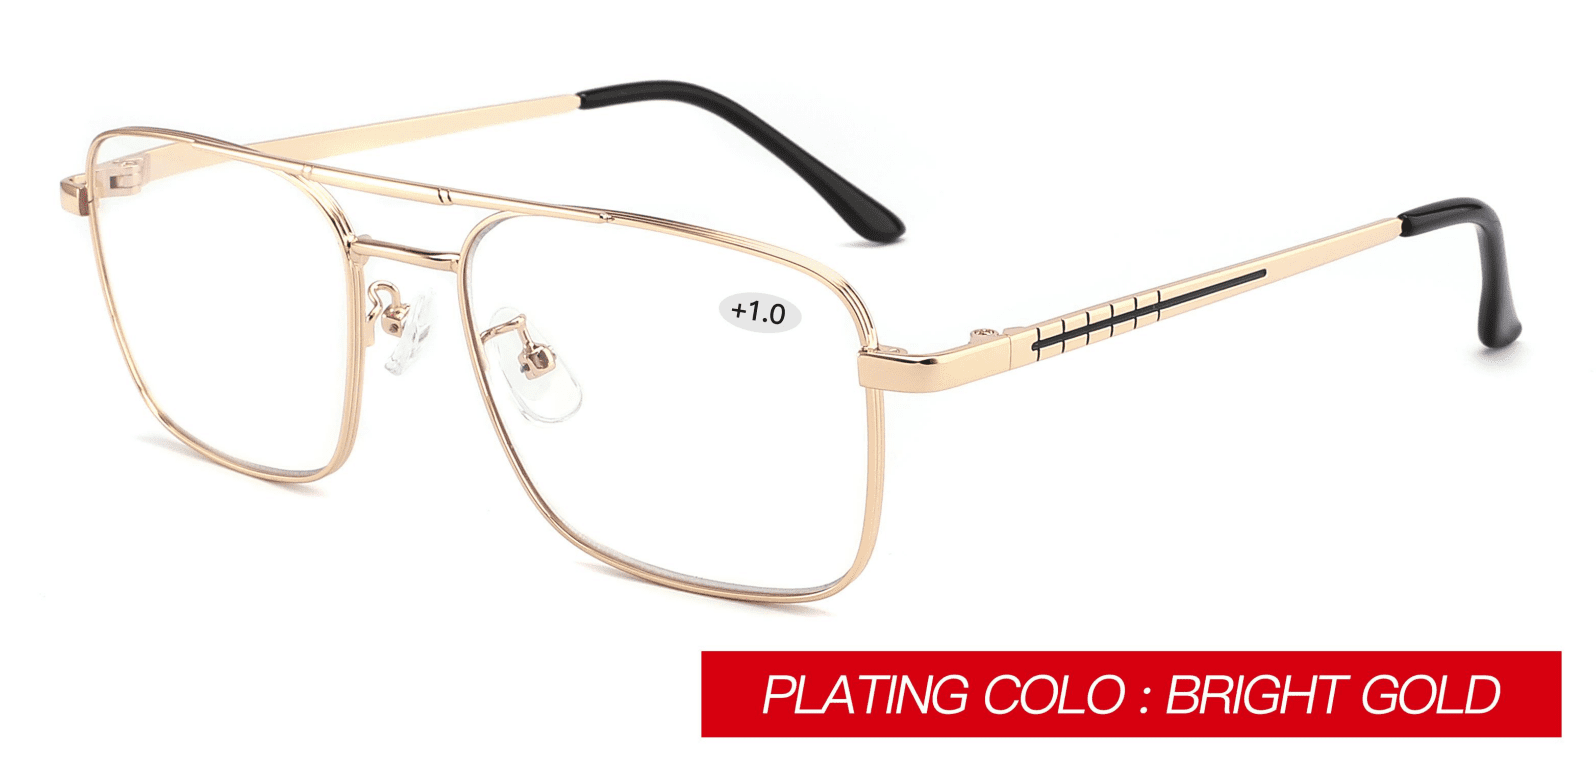 Bulk Wholesale Double Bridge Anti-Blue Reading Glasses Model RG8105, , China reading glasses manufacturer and supplier and distributor, computer glasses, care vision, Ergonomic Nose Pad, stainless steel glasses, gold, slim frame